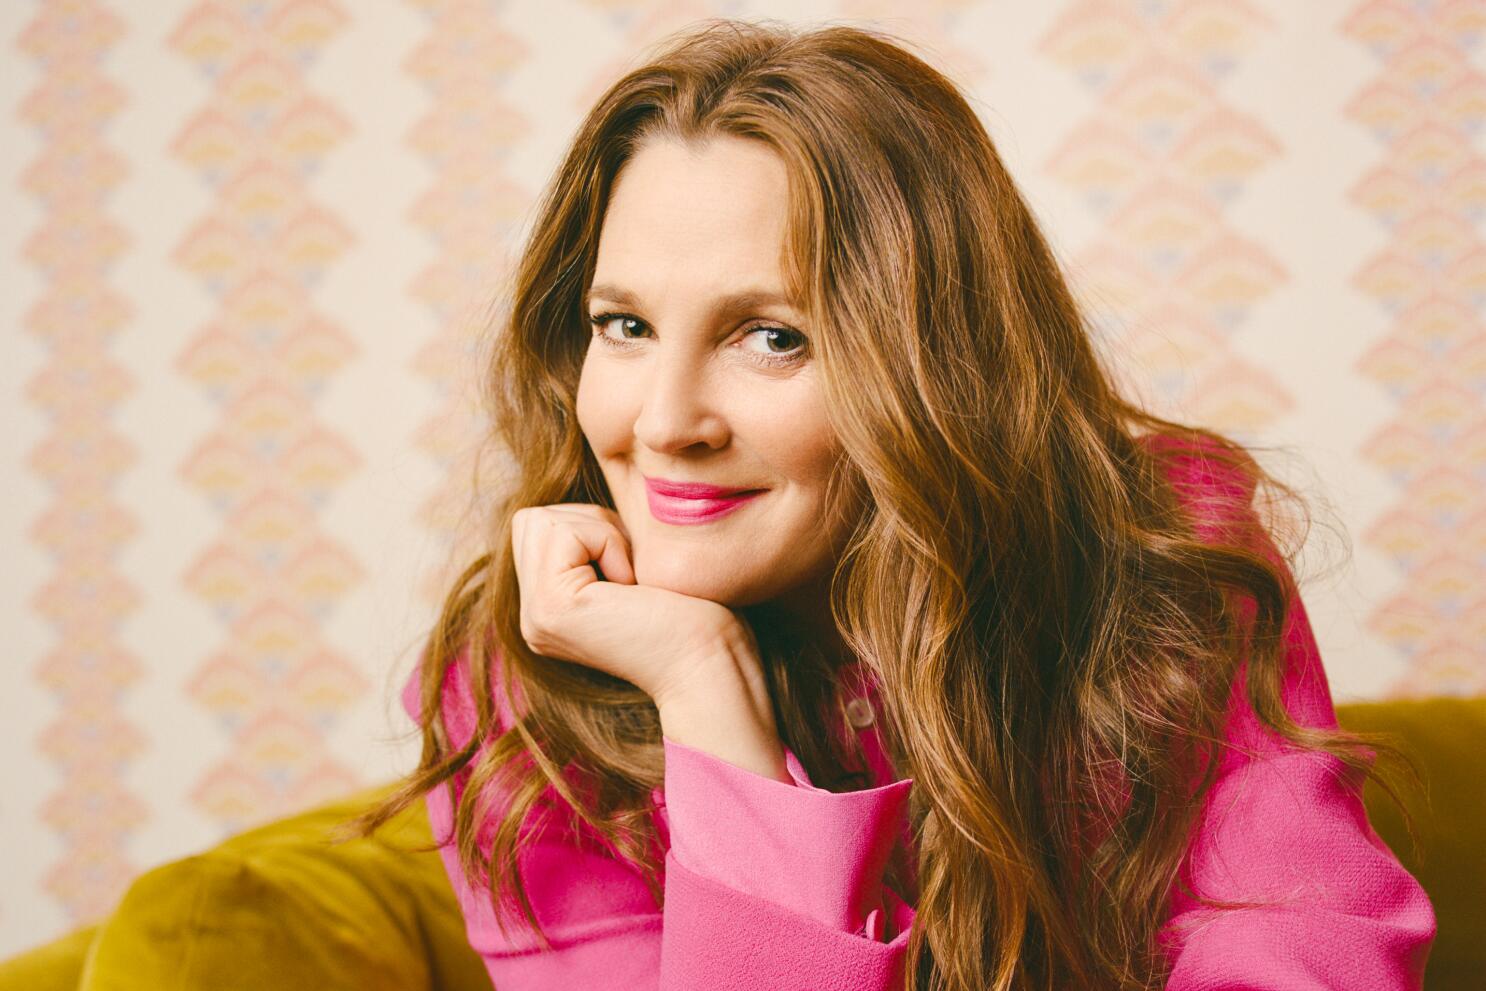 Drew Barrymore Shares Her Favorites From Her New (and Expanding!) 'Beautiful'  Line